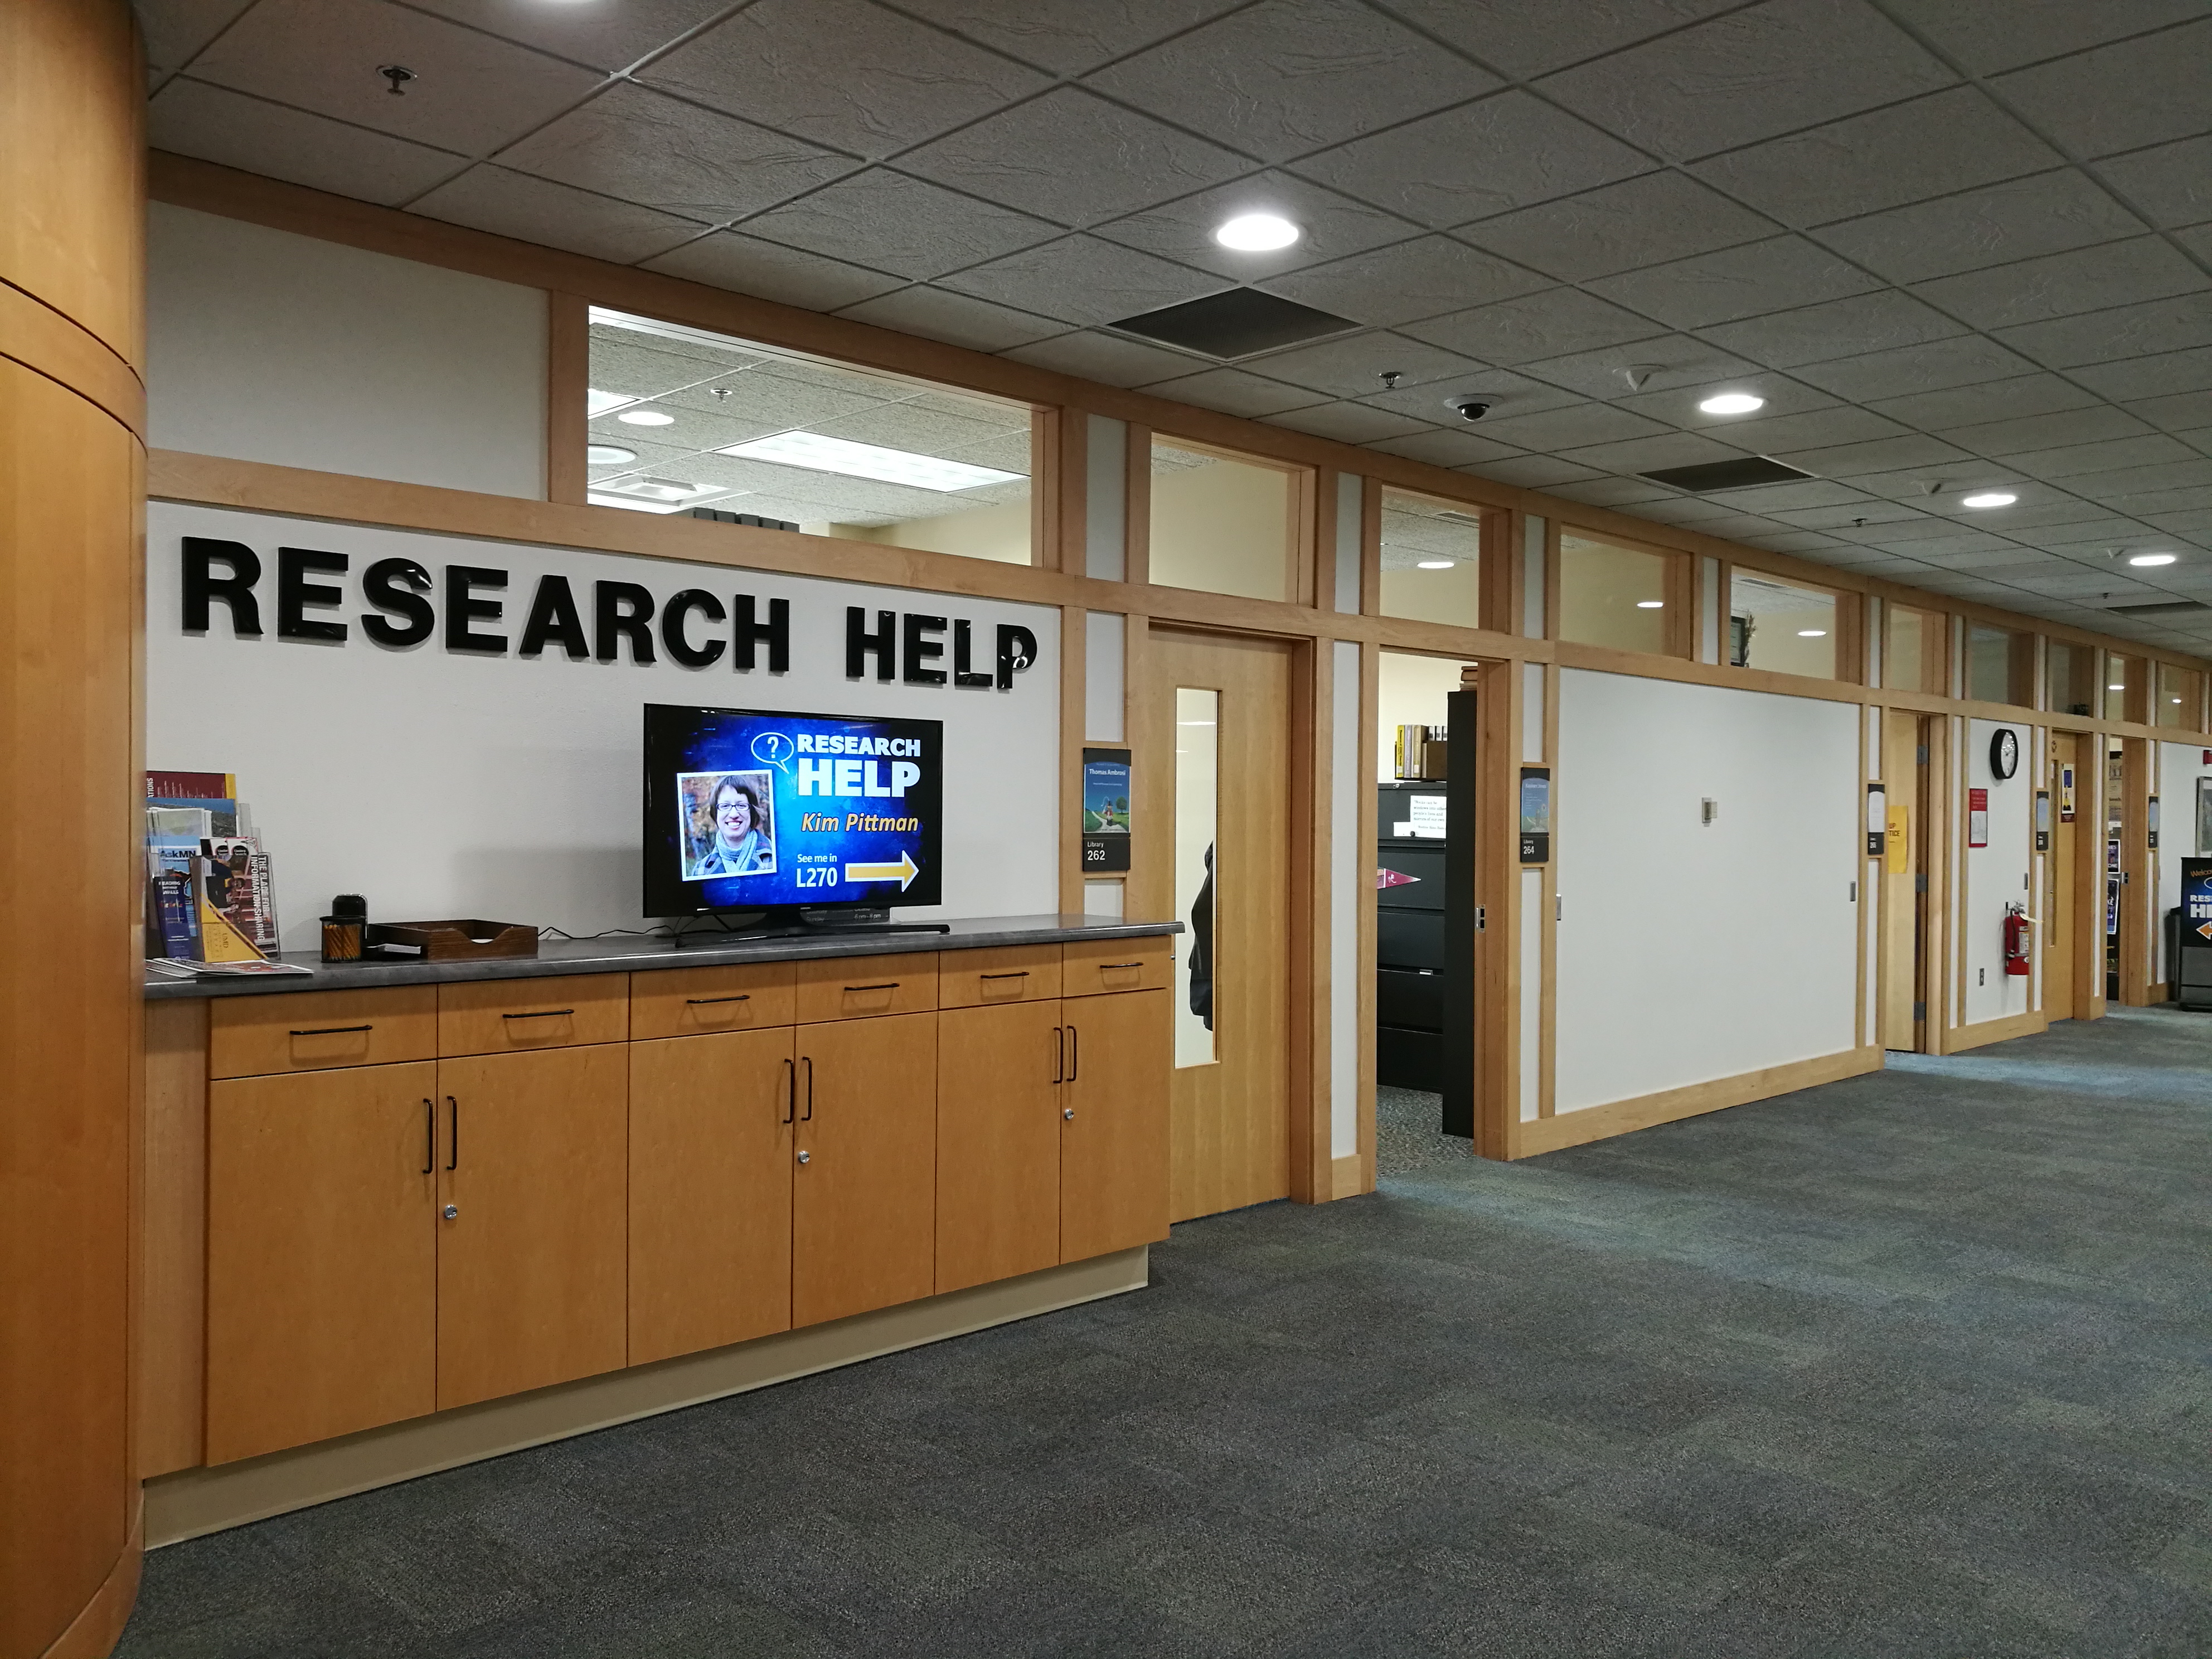 Research & Learning help signage